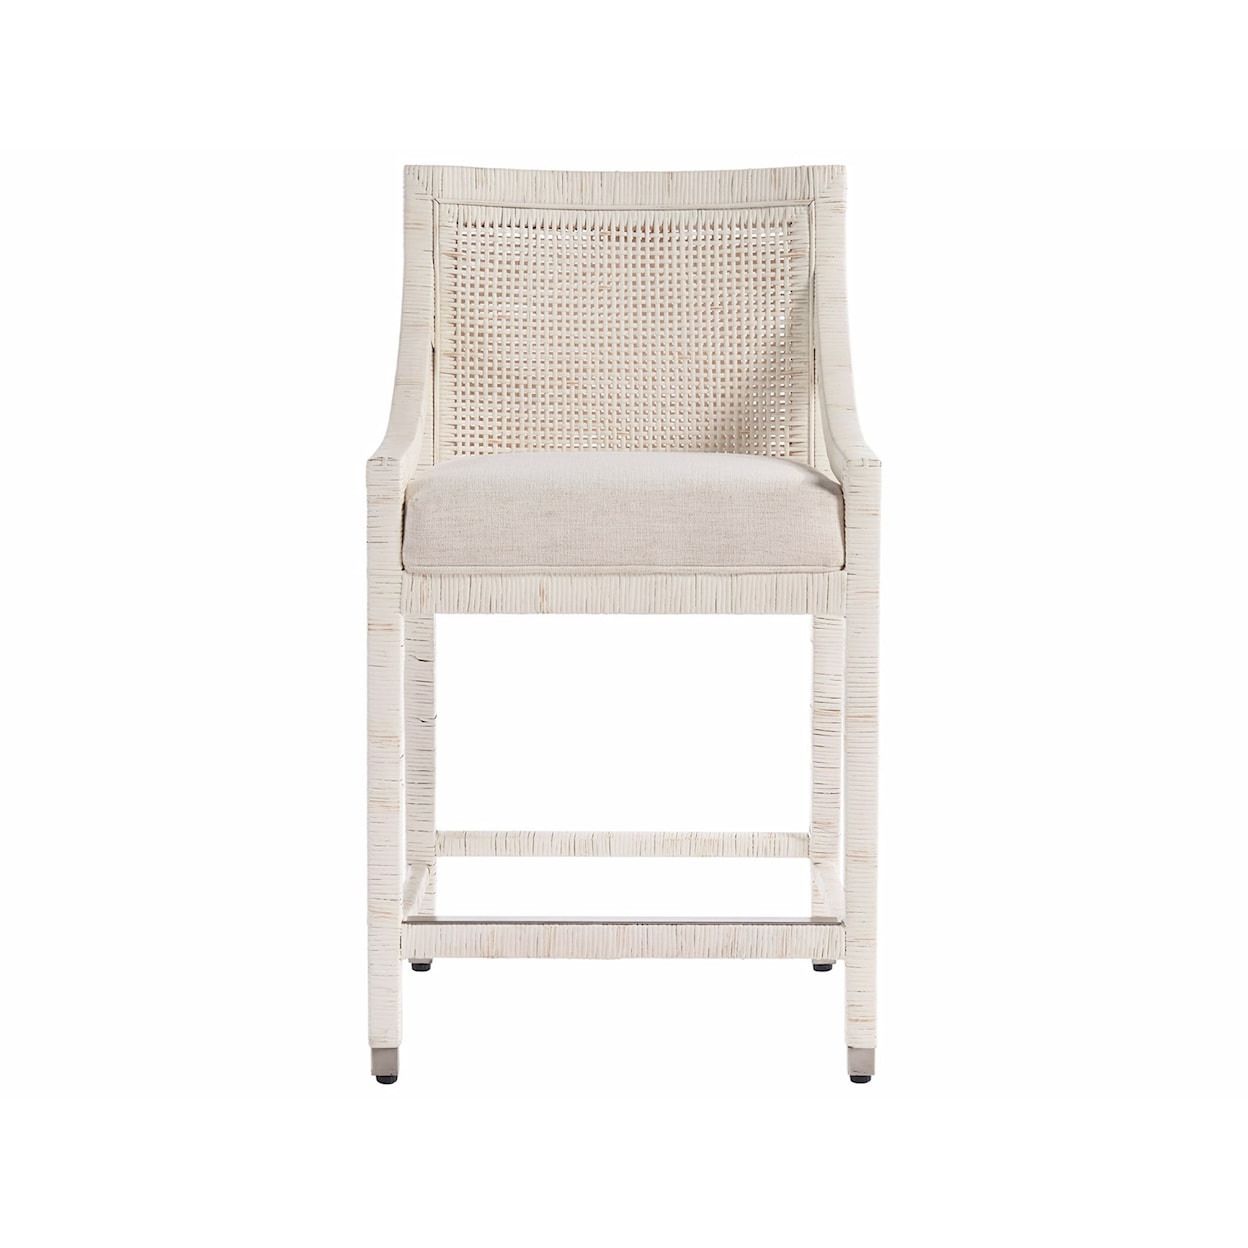 Universal Weekender Coastal Living Home Collection Counter Chair with Rattan Seatback